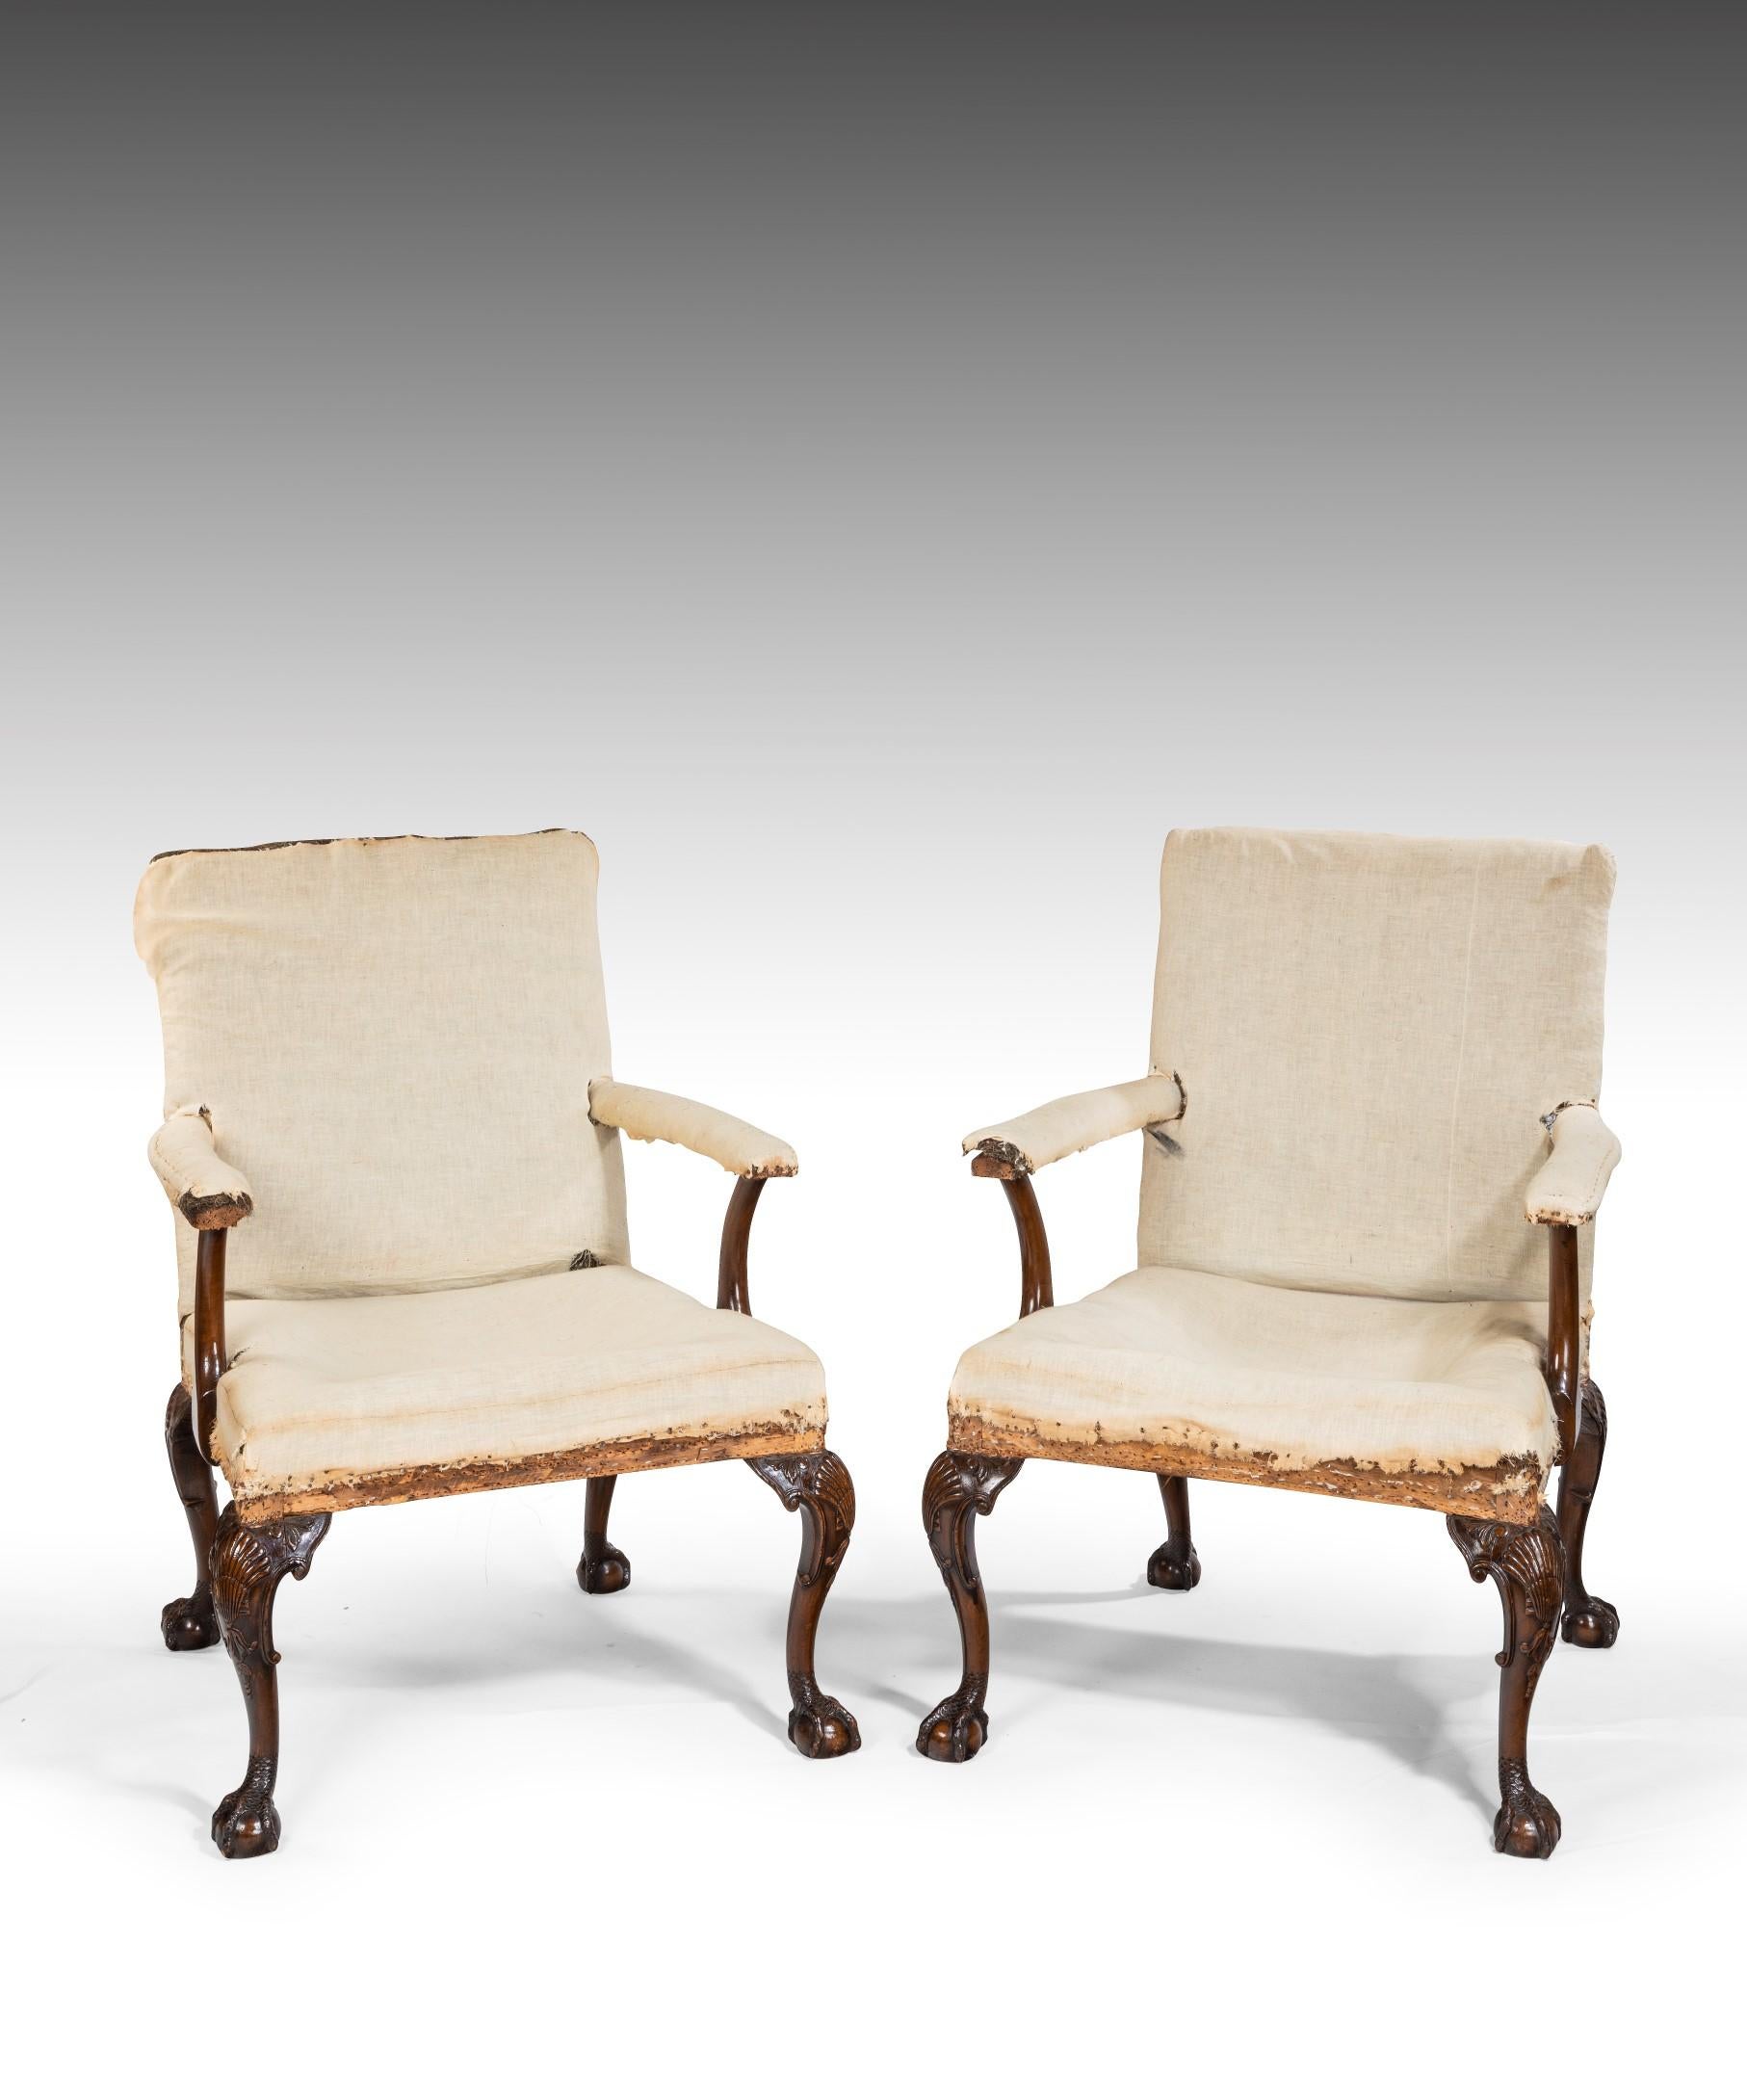 English Pair of 19th Century George II Style Gainsborough Armchairs